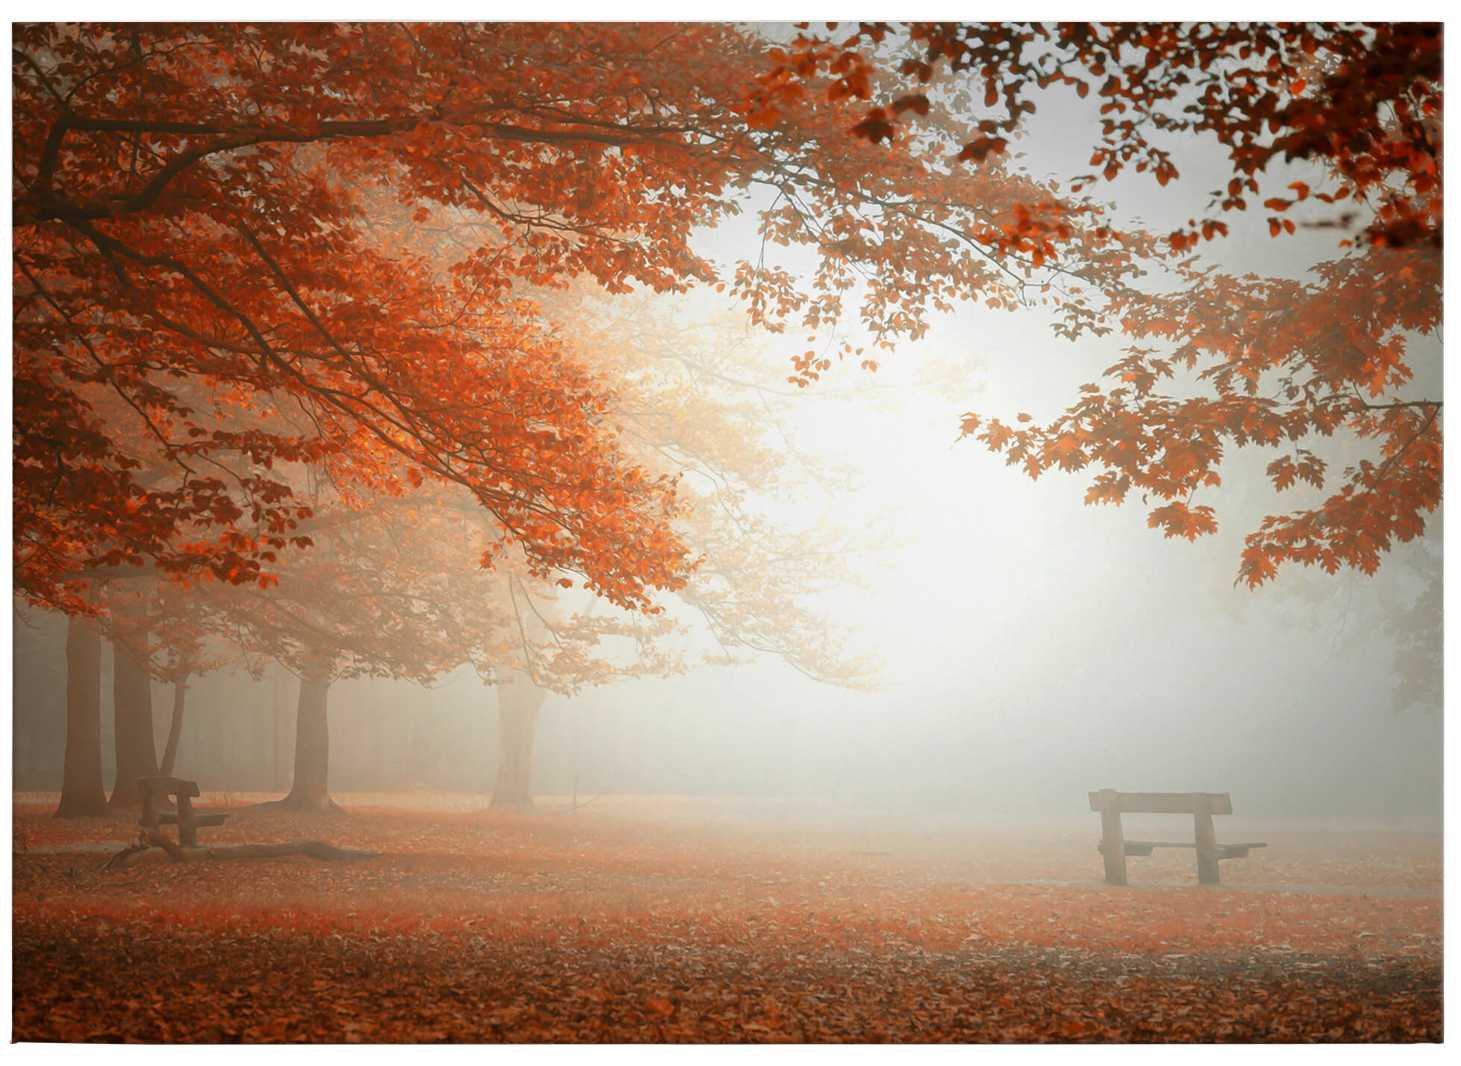             Dingemans canvas print autumn trees and leaves in the mist
        